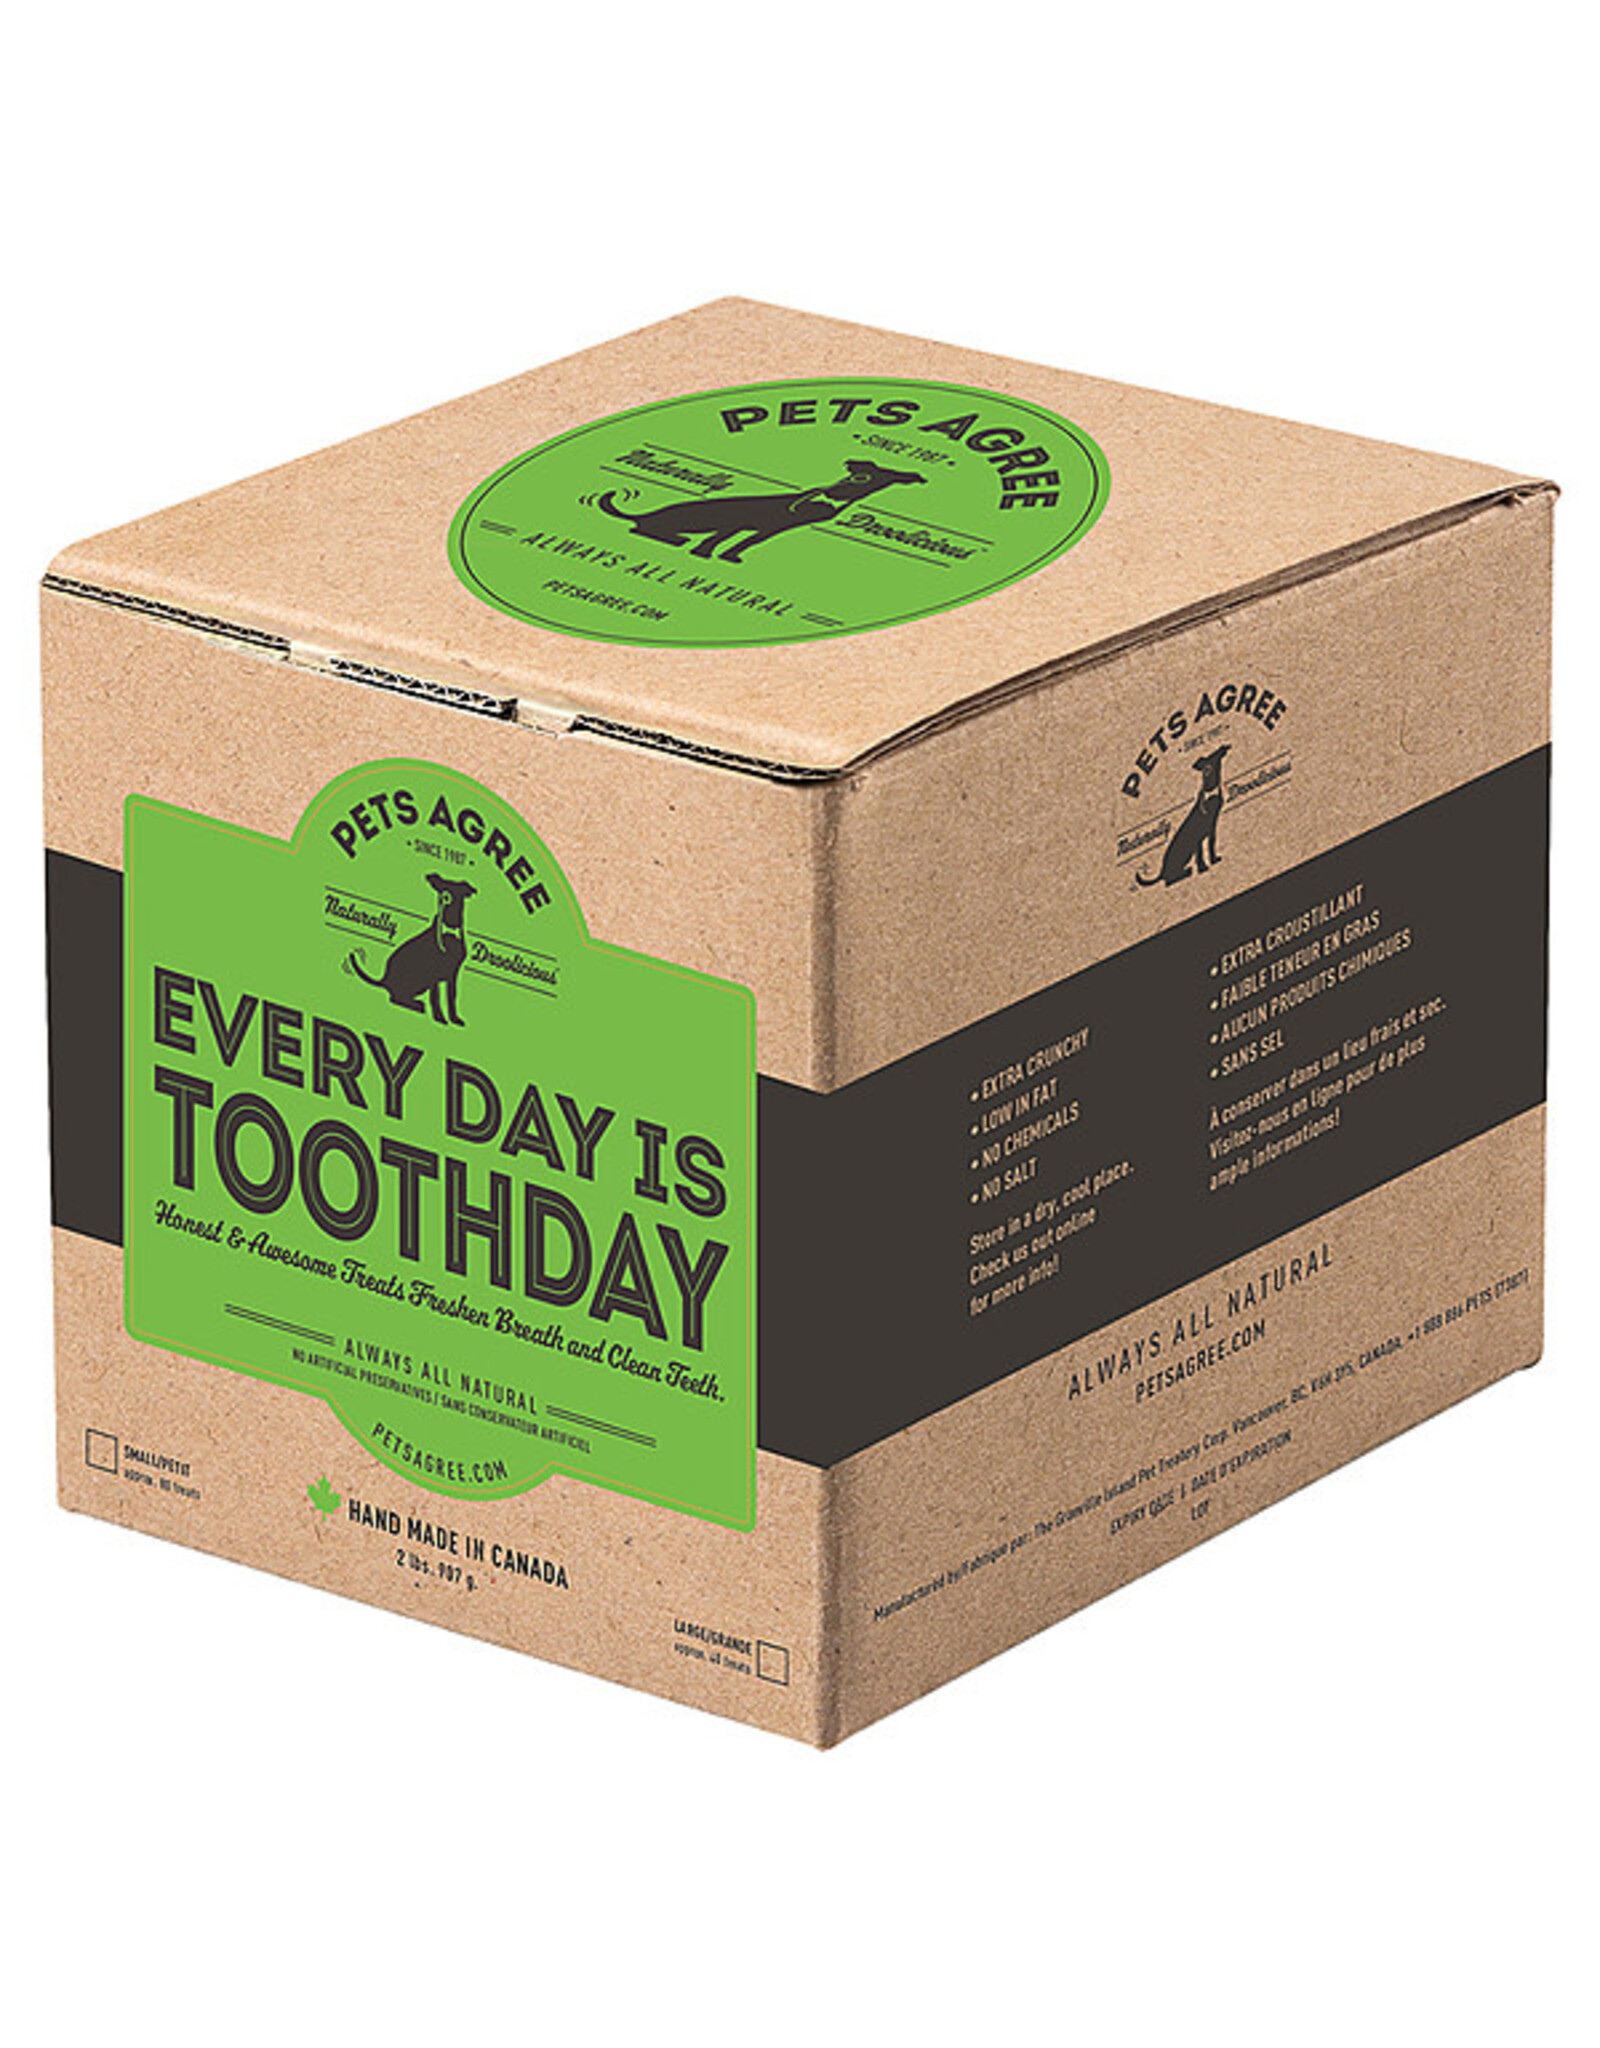 Pets Agree Everyday Is Tooth Day Large 2LB